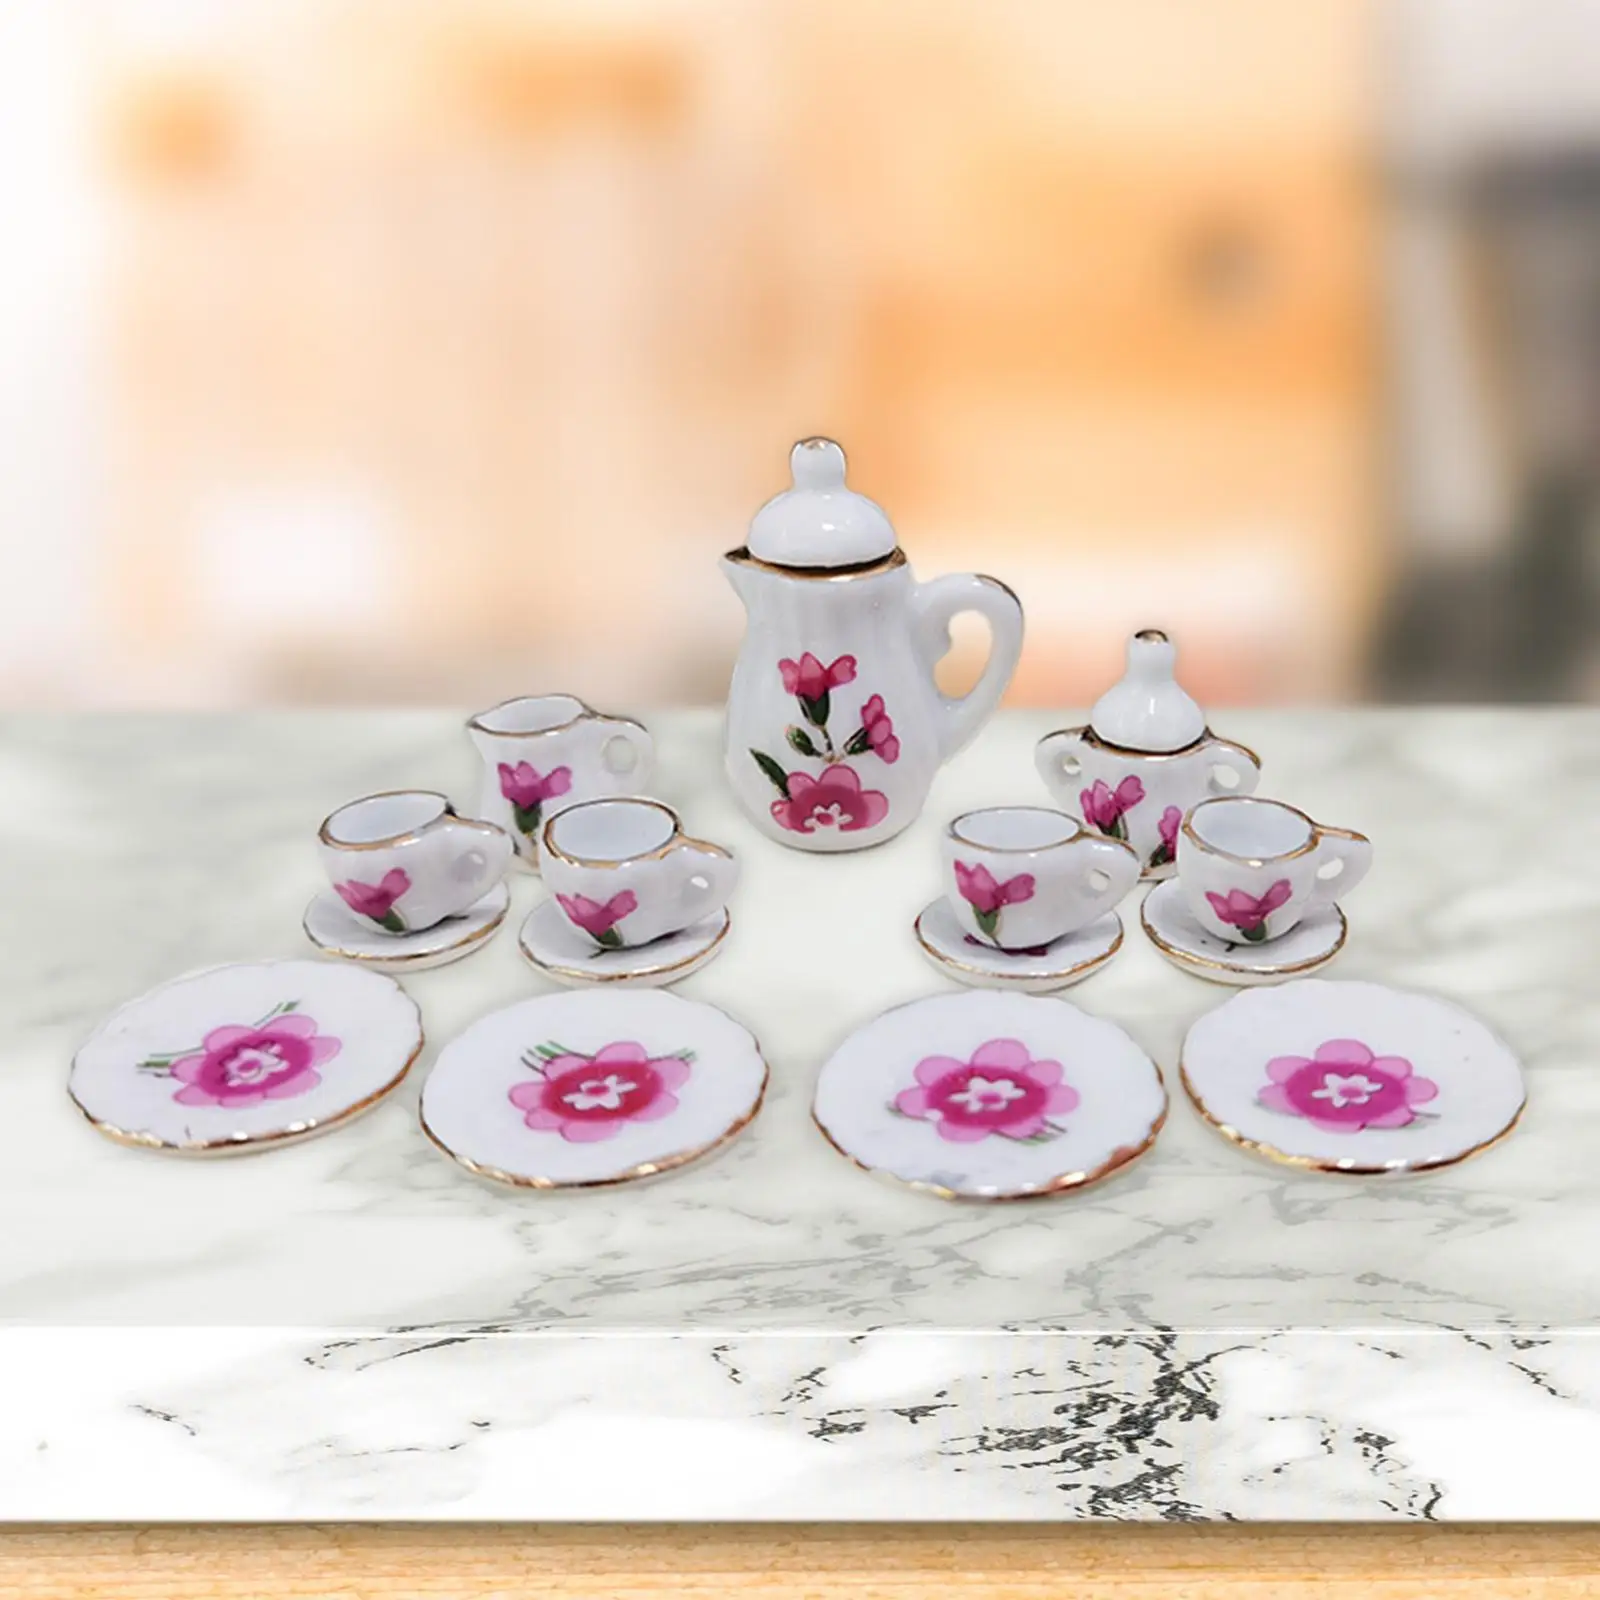 1:12 Dollhouse Miniature Porcelain Tea Cup Accessories Toys,Dining Room Simulation Dining Ware,Mini Teapot Cup Plate Ornaments